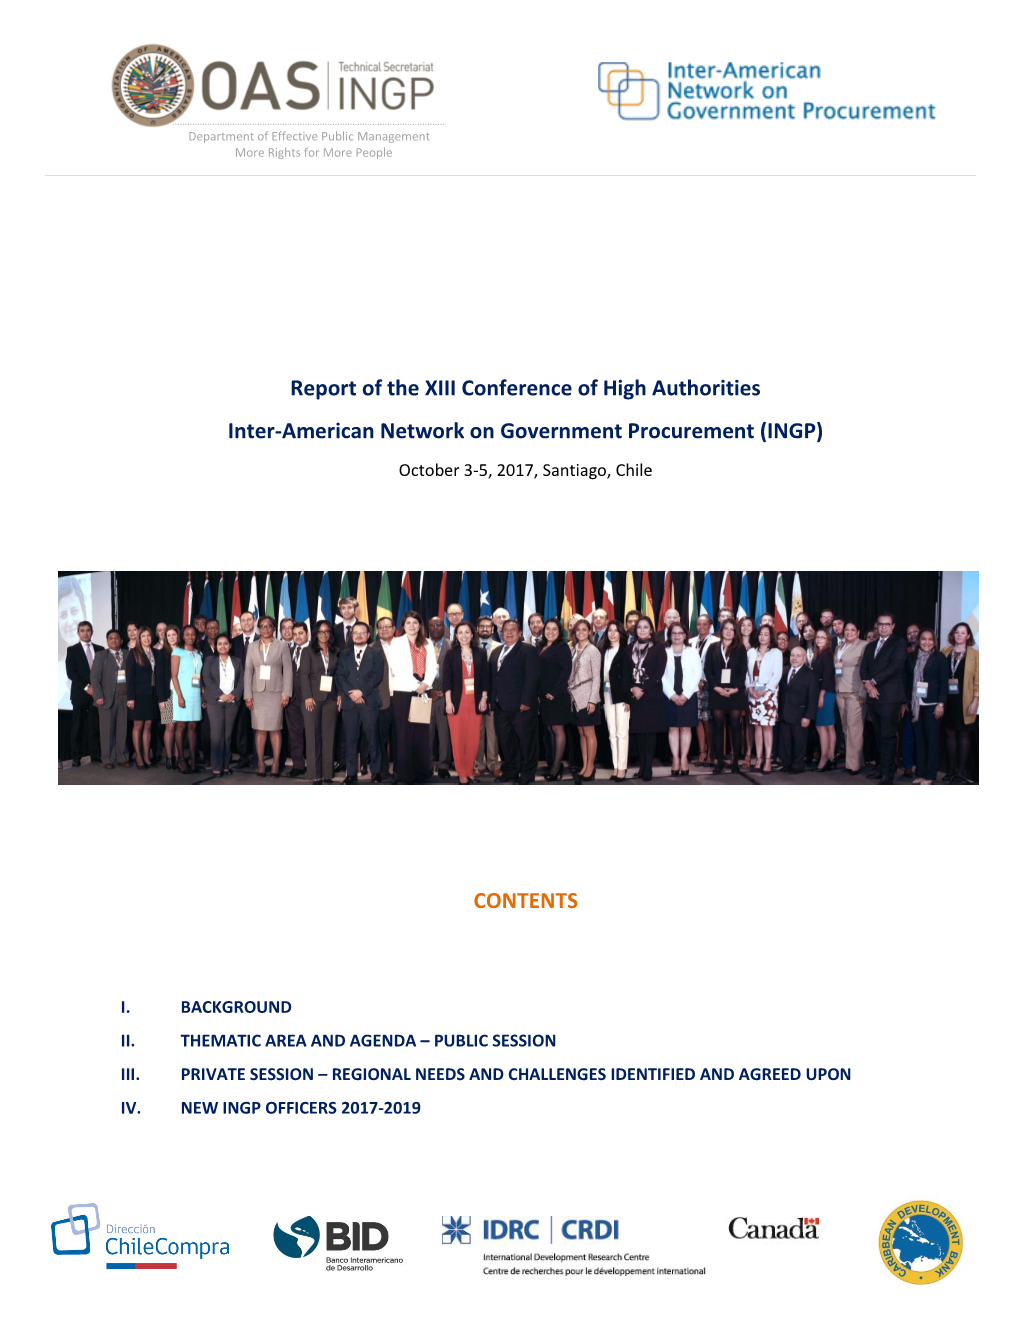 Report of the XIII Conference of High Authorities Inter-American Network on Government Procurement (INGP) CONTENTS